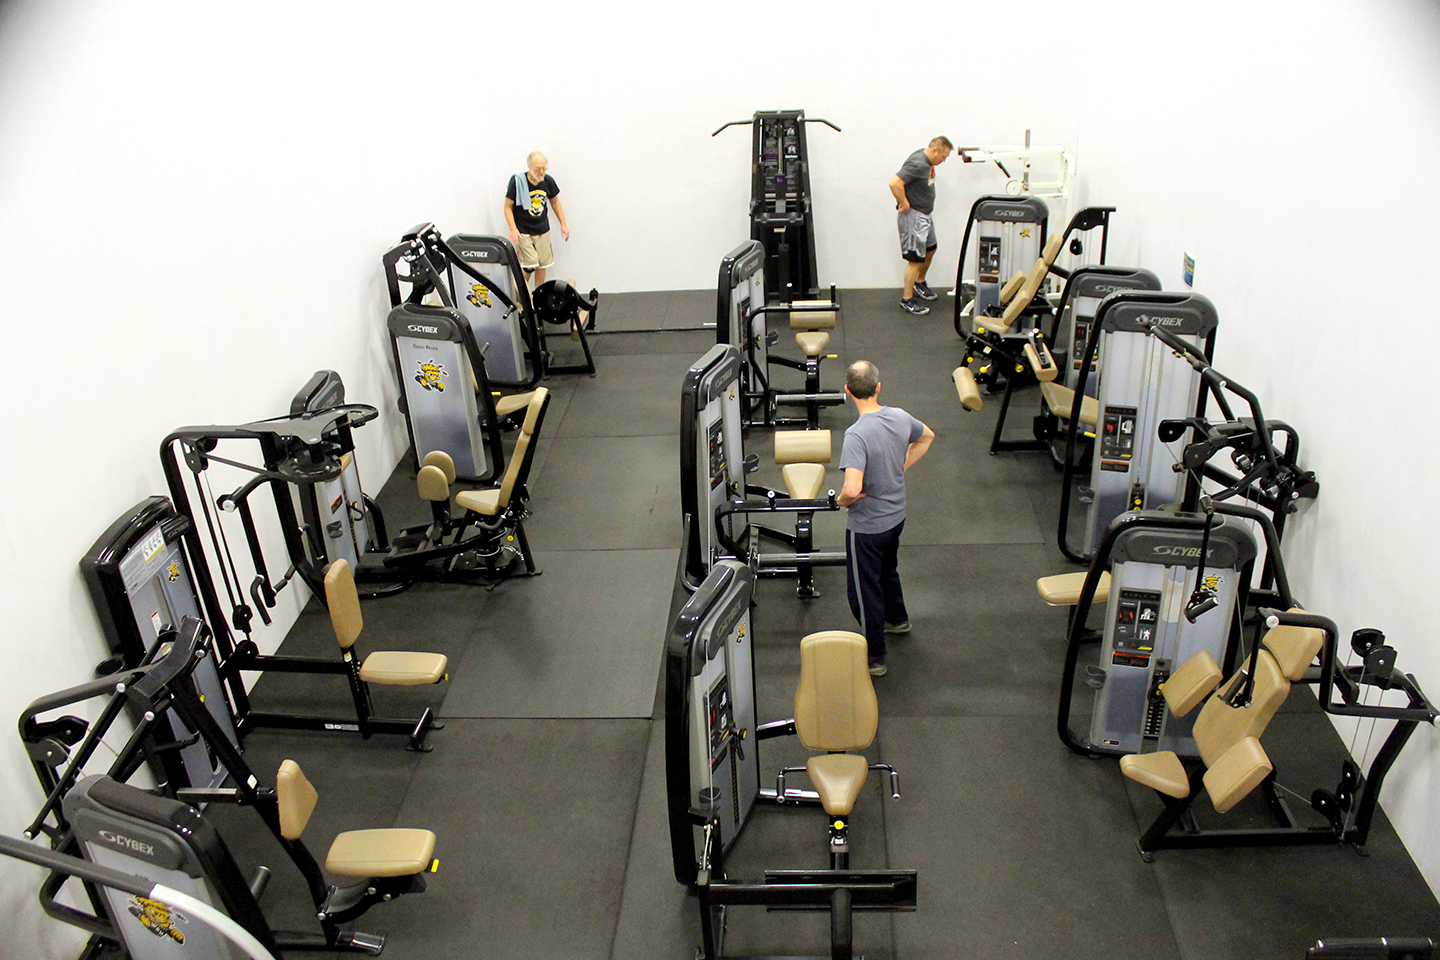 view of the circut room, a room with various exersize equipment on a gym type floor, from a high view. Theres like. Three guys.